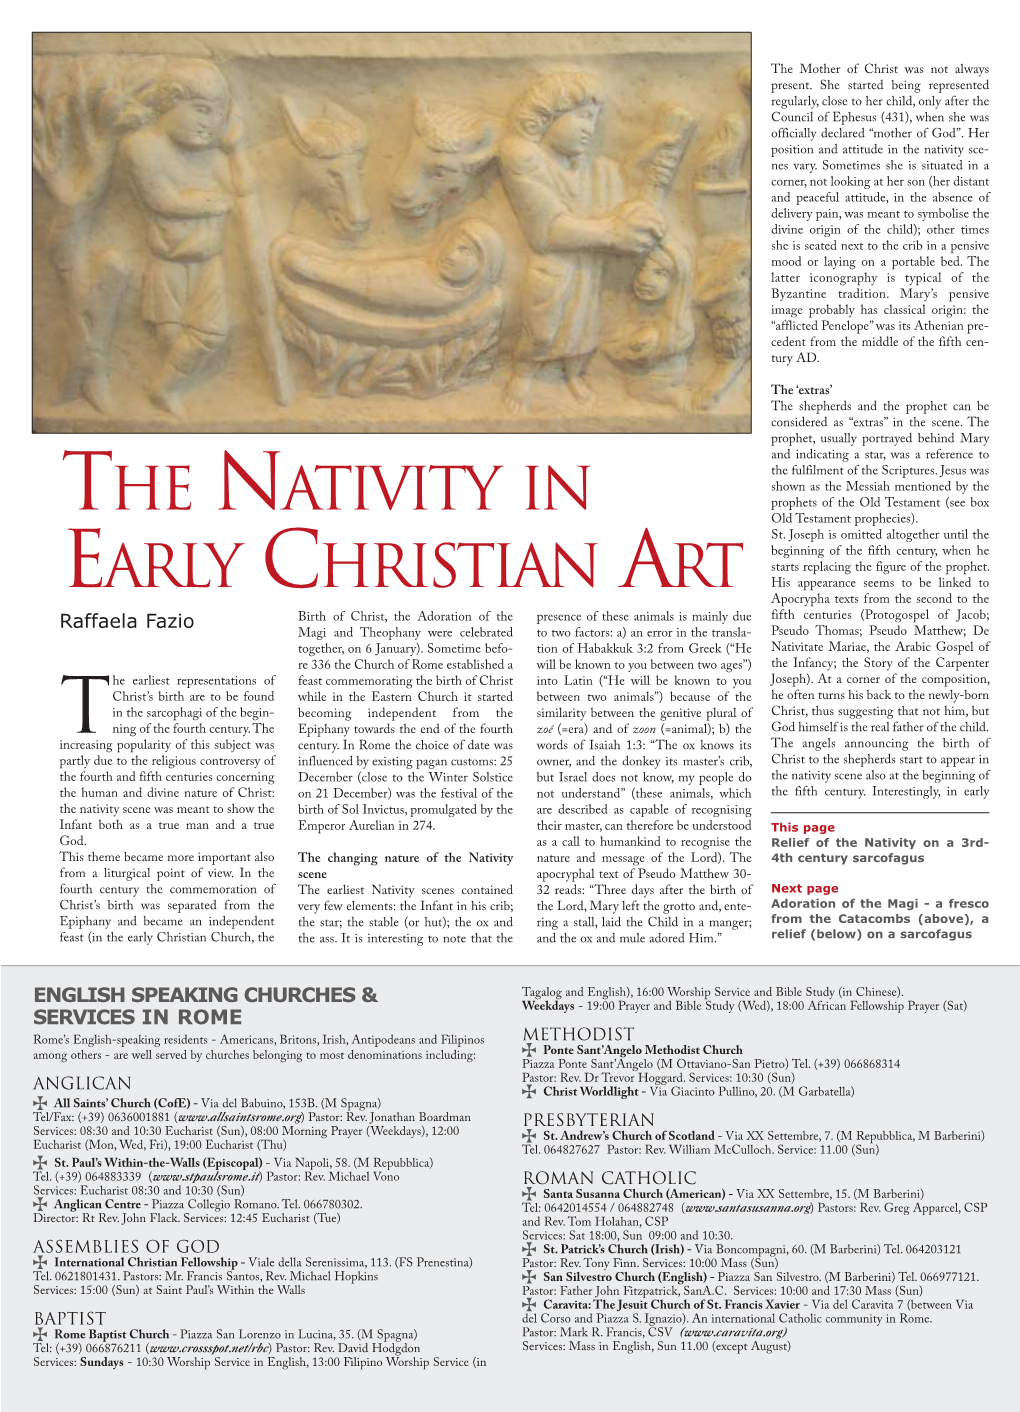 The Nativity in Early Christian